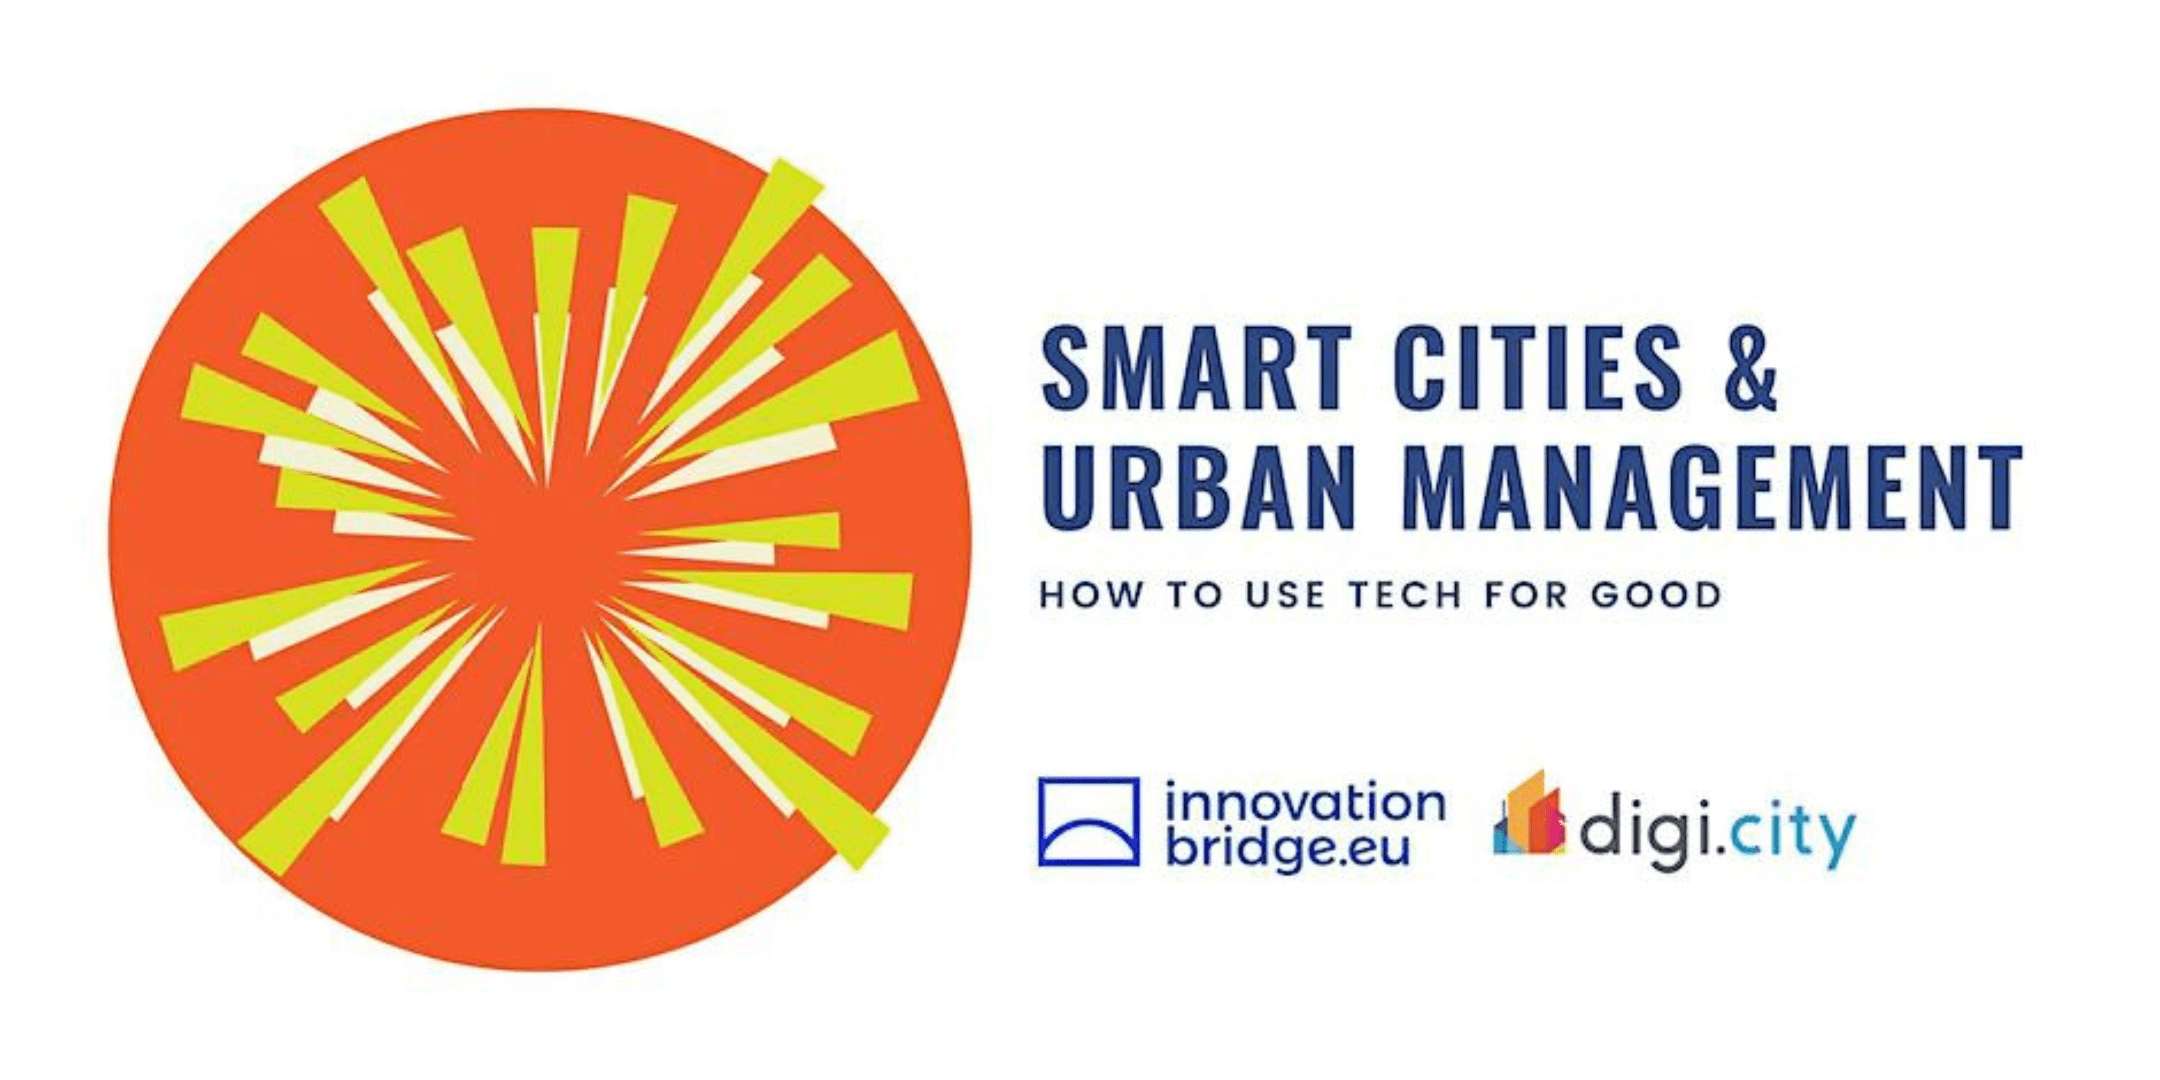 Smart Cities & Urban Management - How to Use Tech For Good Event Page